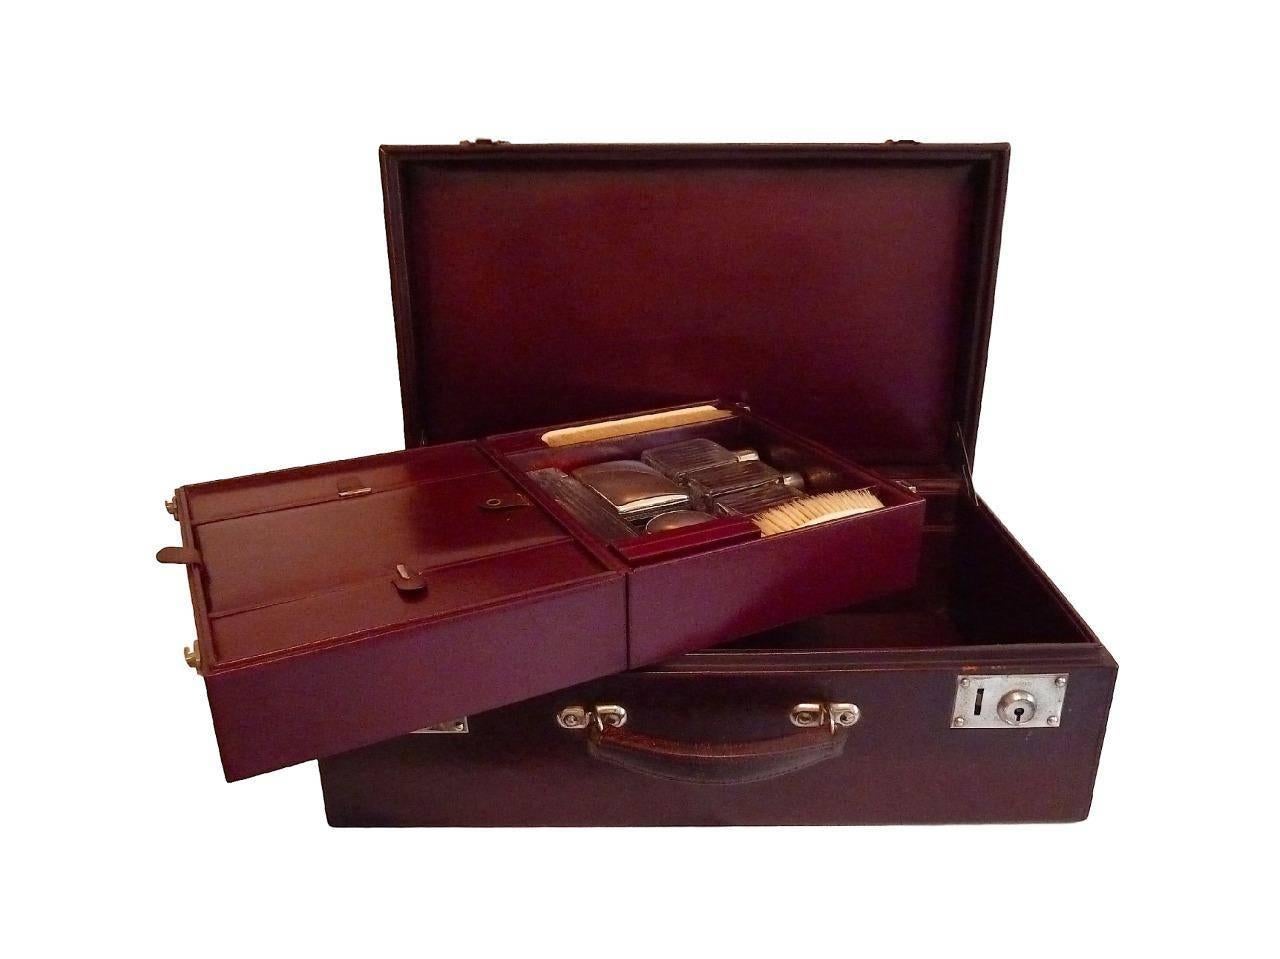 A very rare and exceptional Louis Vuitton Double traveling case from when traveling in style was the order of the day. This rare 